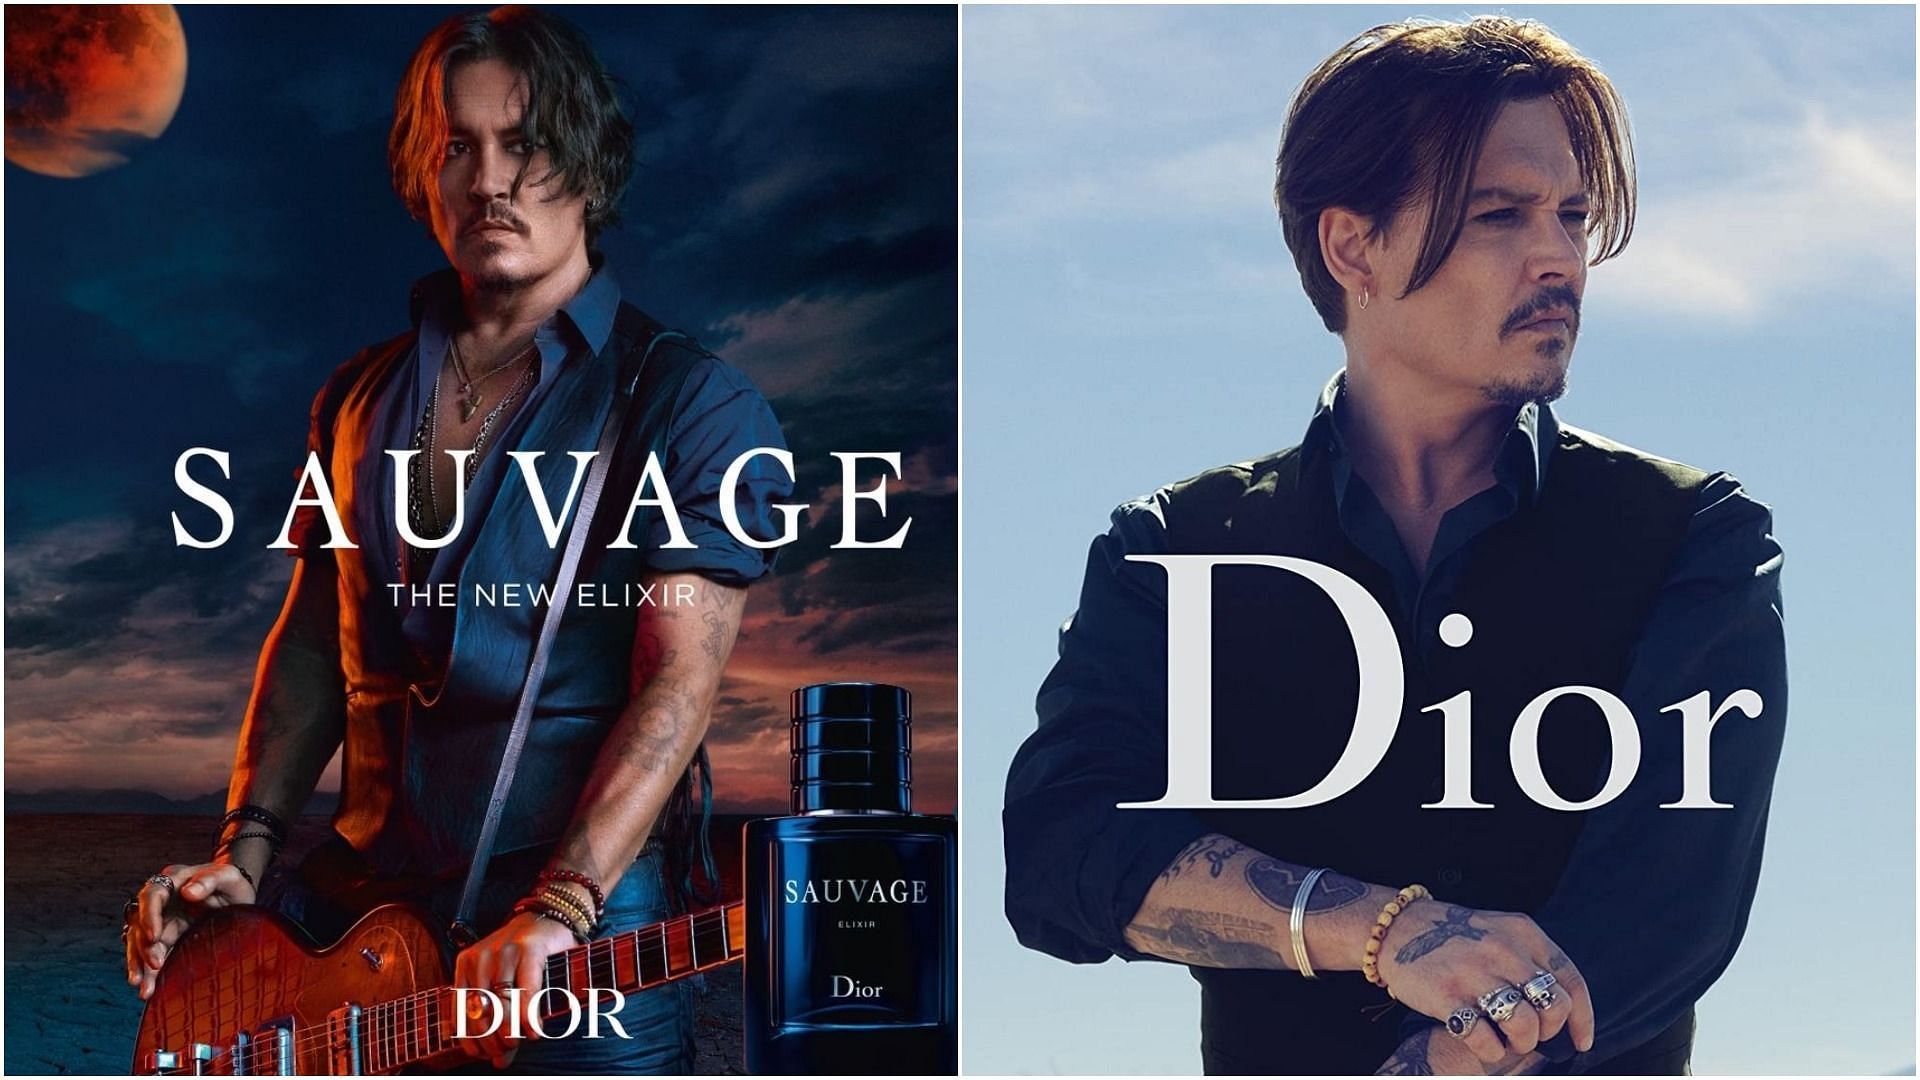 Johnny Depp Signs New 20M Deal with Dior Sauvage Fragrance  The Hollywood  Reporter